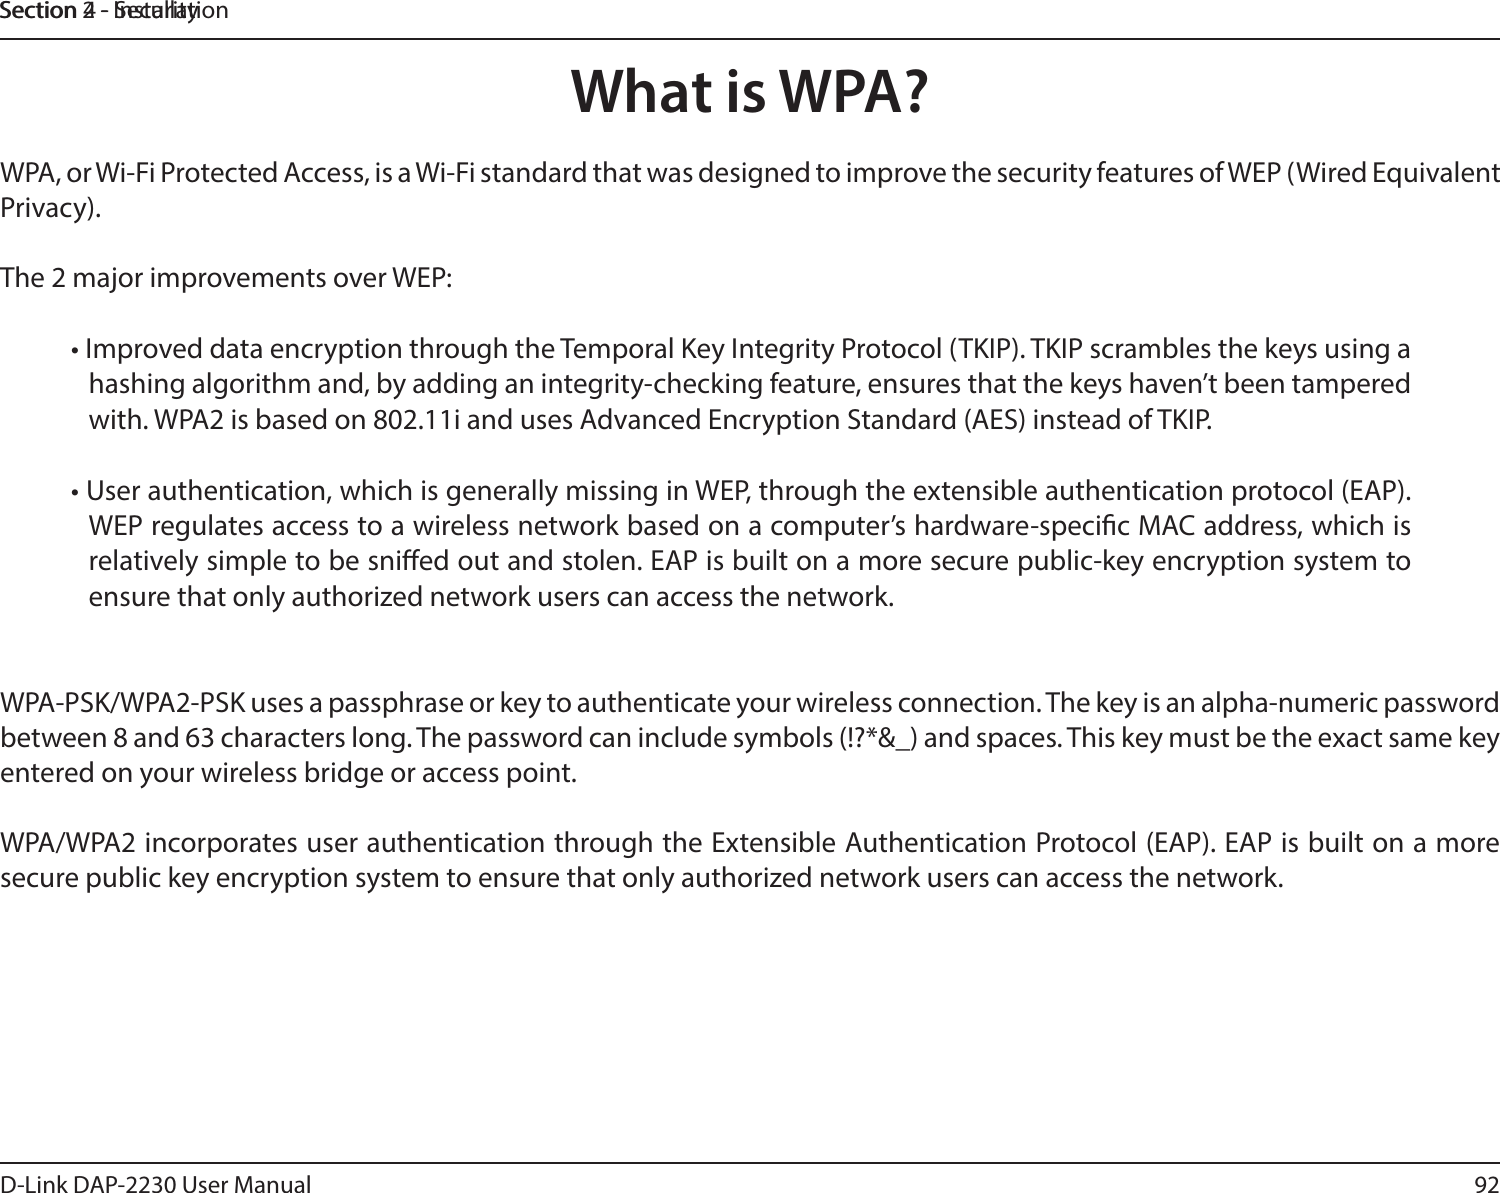 92D-Link DAP-2230 User ManualSection 2 - InstallationSection 4 - SecurityWhat is WPA?WPA, or Wi-Fi Protected Access, is a Wi-Fi standard that was designed to improve the security features of WEP (Wired Equivalent Privacy).The 2 major improvements over WEP: • Improved data encryption through the Temporal Key Integrity Protocol (TKIP). TKIP scrambles the keys using a hashing algorithm and, by adding an integrity-checking feature, ensures that the keys haven’t been tampered with. WPA2 is based on 802.11i and uses Advanced Encryption Standard (AES) instead of TKIP.• User authentication, which is generally missing in WEP, through the extensible authentication protocol (EAP). WEP regulates access to a wireless network based on a computer’s hardware-specic MAC address, which is relatively simple to be snied out and stolen. EAP is built on a more secure public-key encryption system to ensure that only authorized network users can access the network.WPA-PSK/WPA2-PSK uses a passphrase or key to authenticate your wireless connection. The key is an alpha-numeric password between 8 and 63 characters long. The password can include symbols (!?*&amp;_) and spaces. This key must be the exact same key entered on your wireless bridge or access point.WPA/WPA2 incorporates user authentication through the Extensible Authentication Protocol (EAP). EAP is built on a more secure public key encryption system to ensure that only authorized network users can access the network.